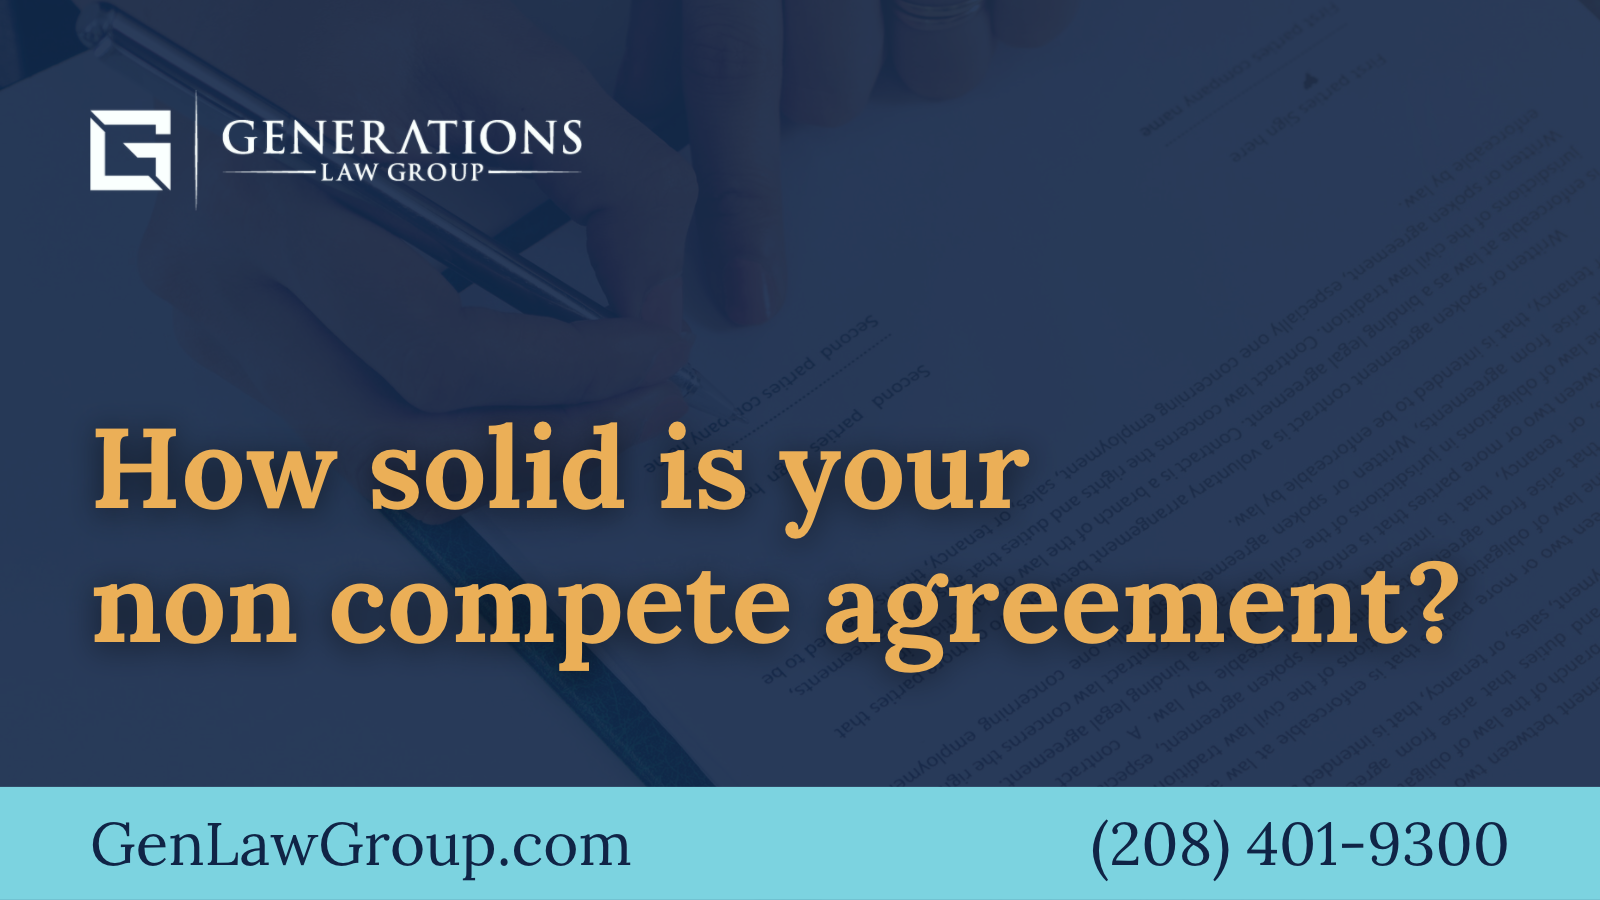 How solid is your non compete agreement?